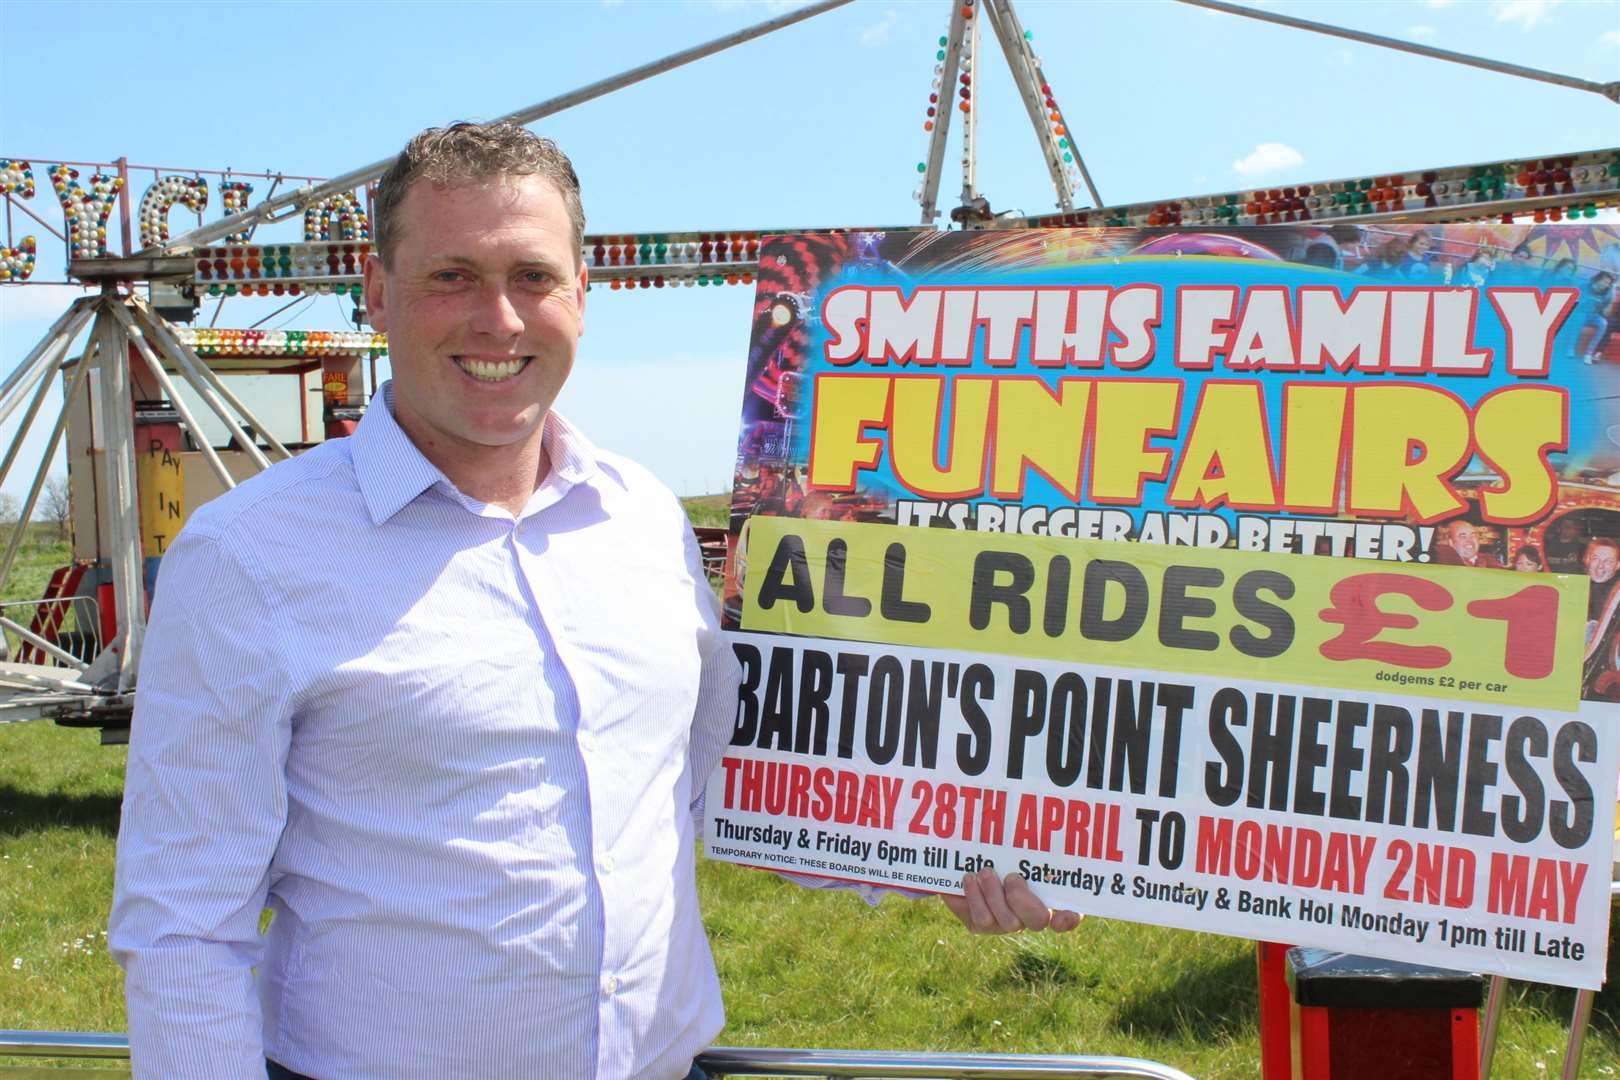 Carlos Christian of Smiths Family Funfairs pictured at Barton's Point Coastal Park, Sheerness